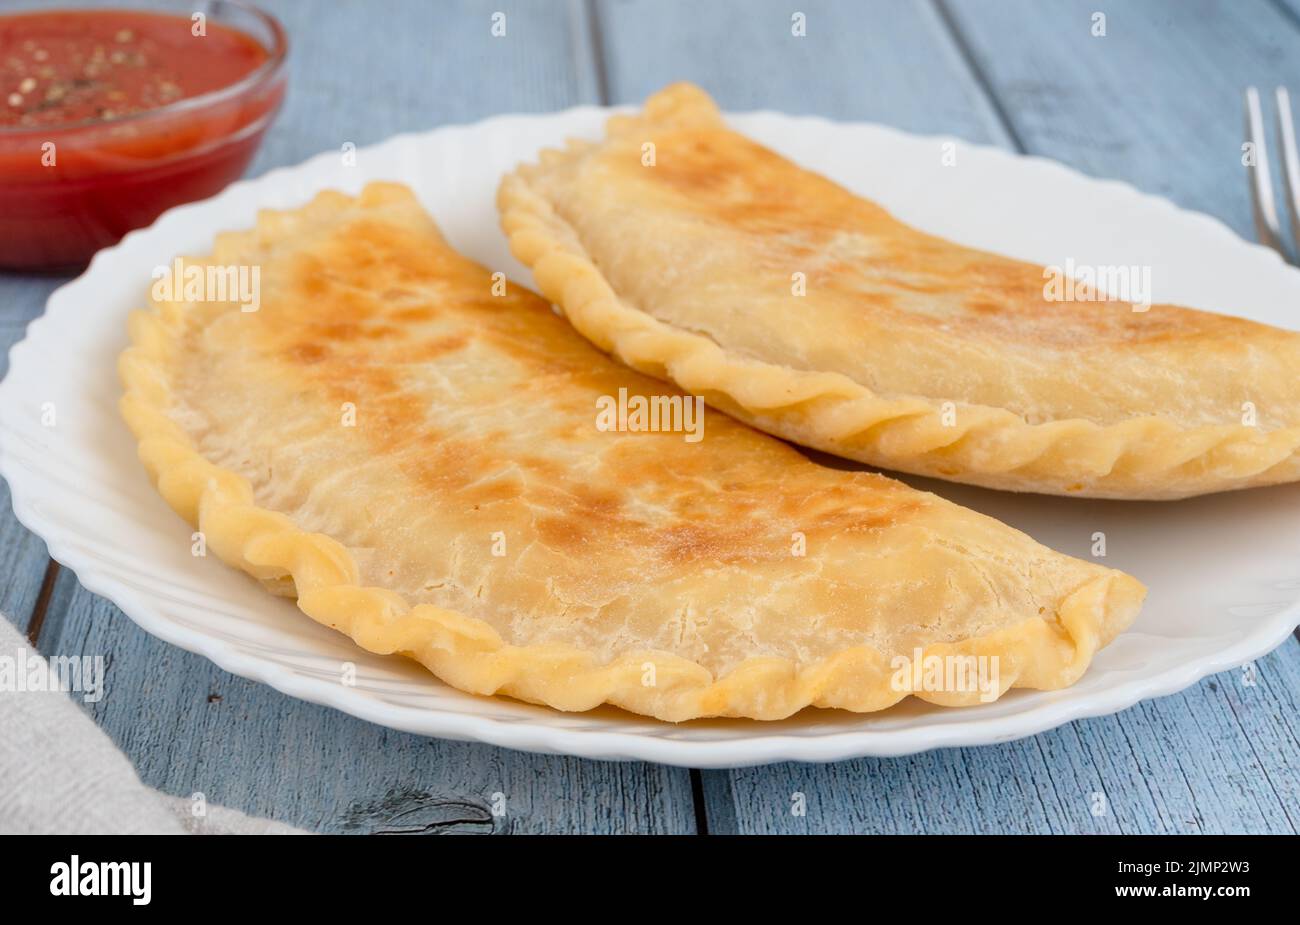 Fried pies with meat on a plate Stock Photo